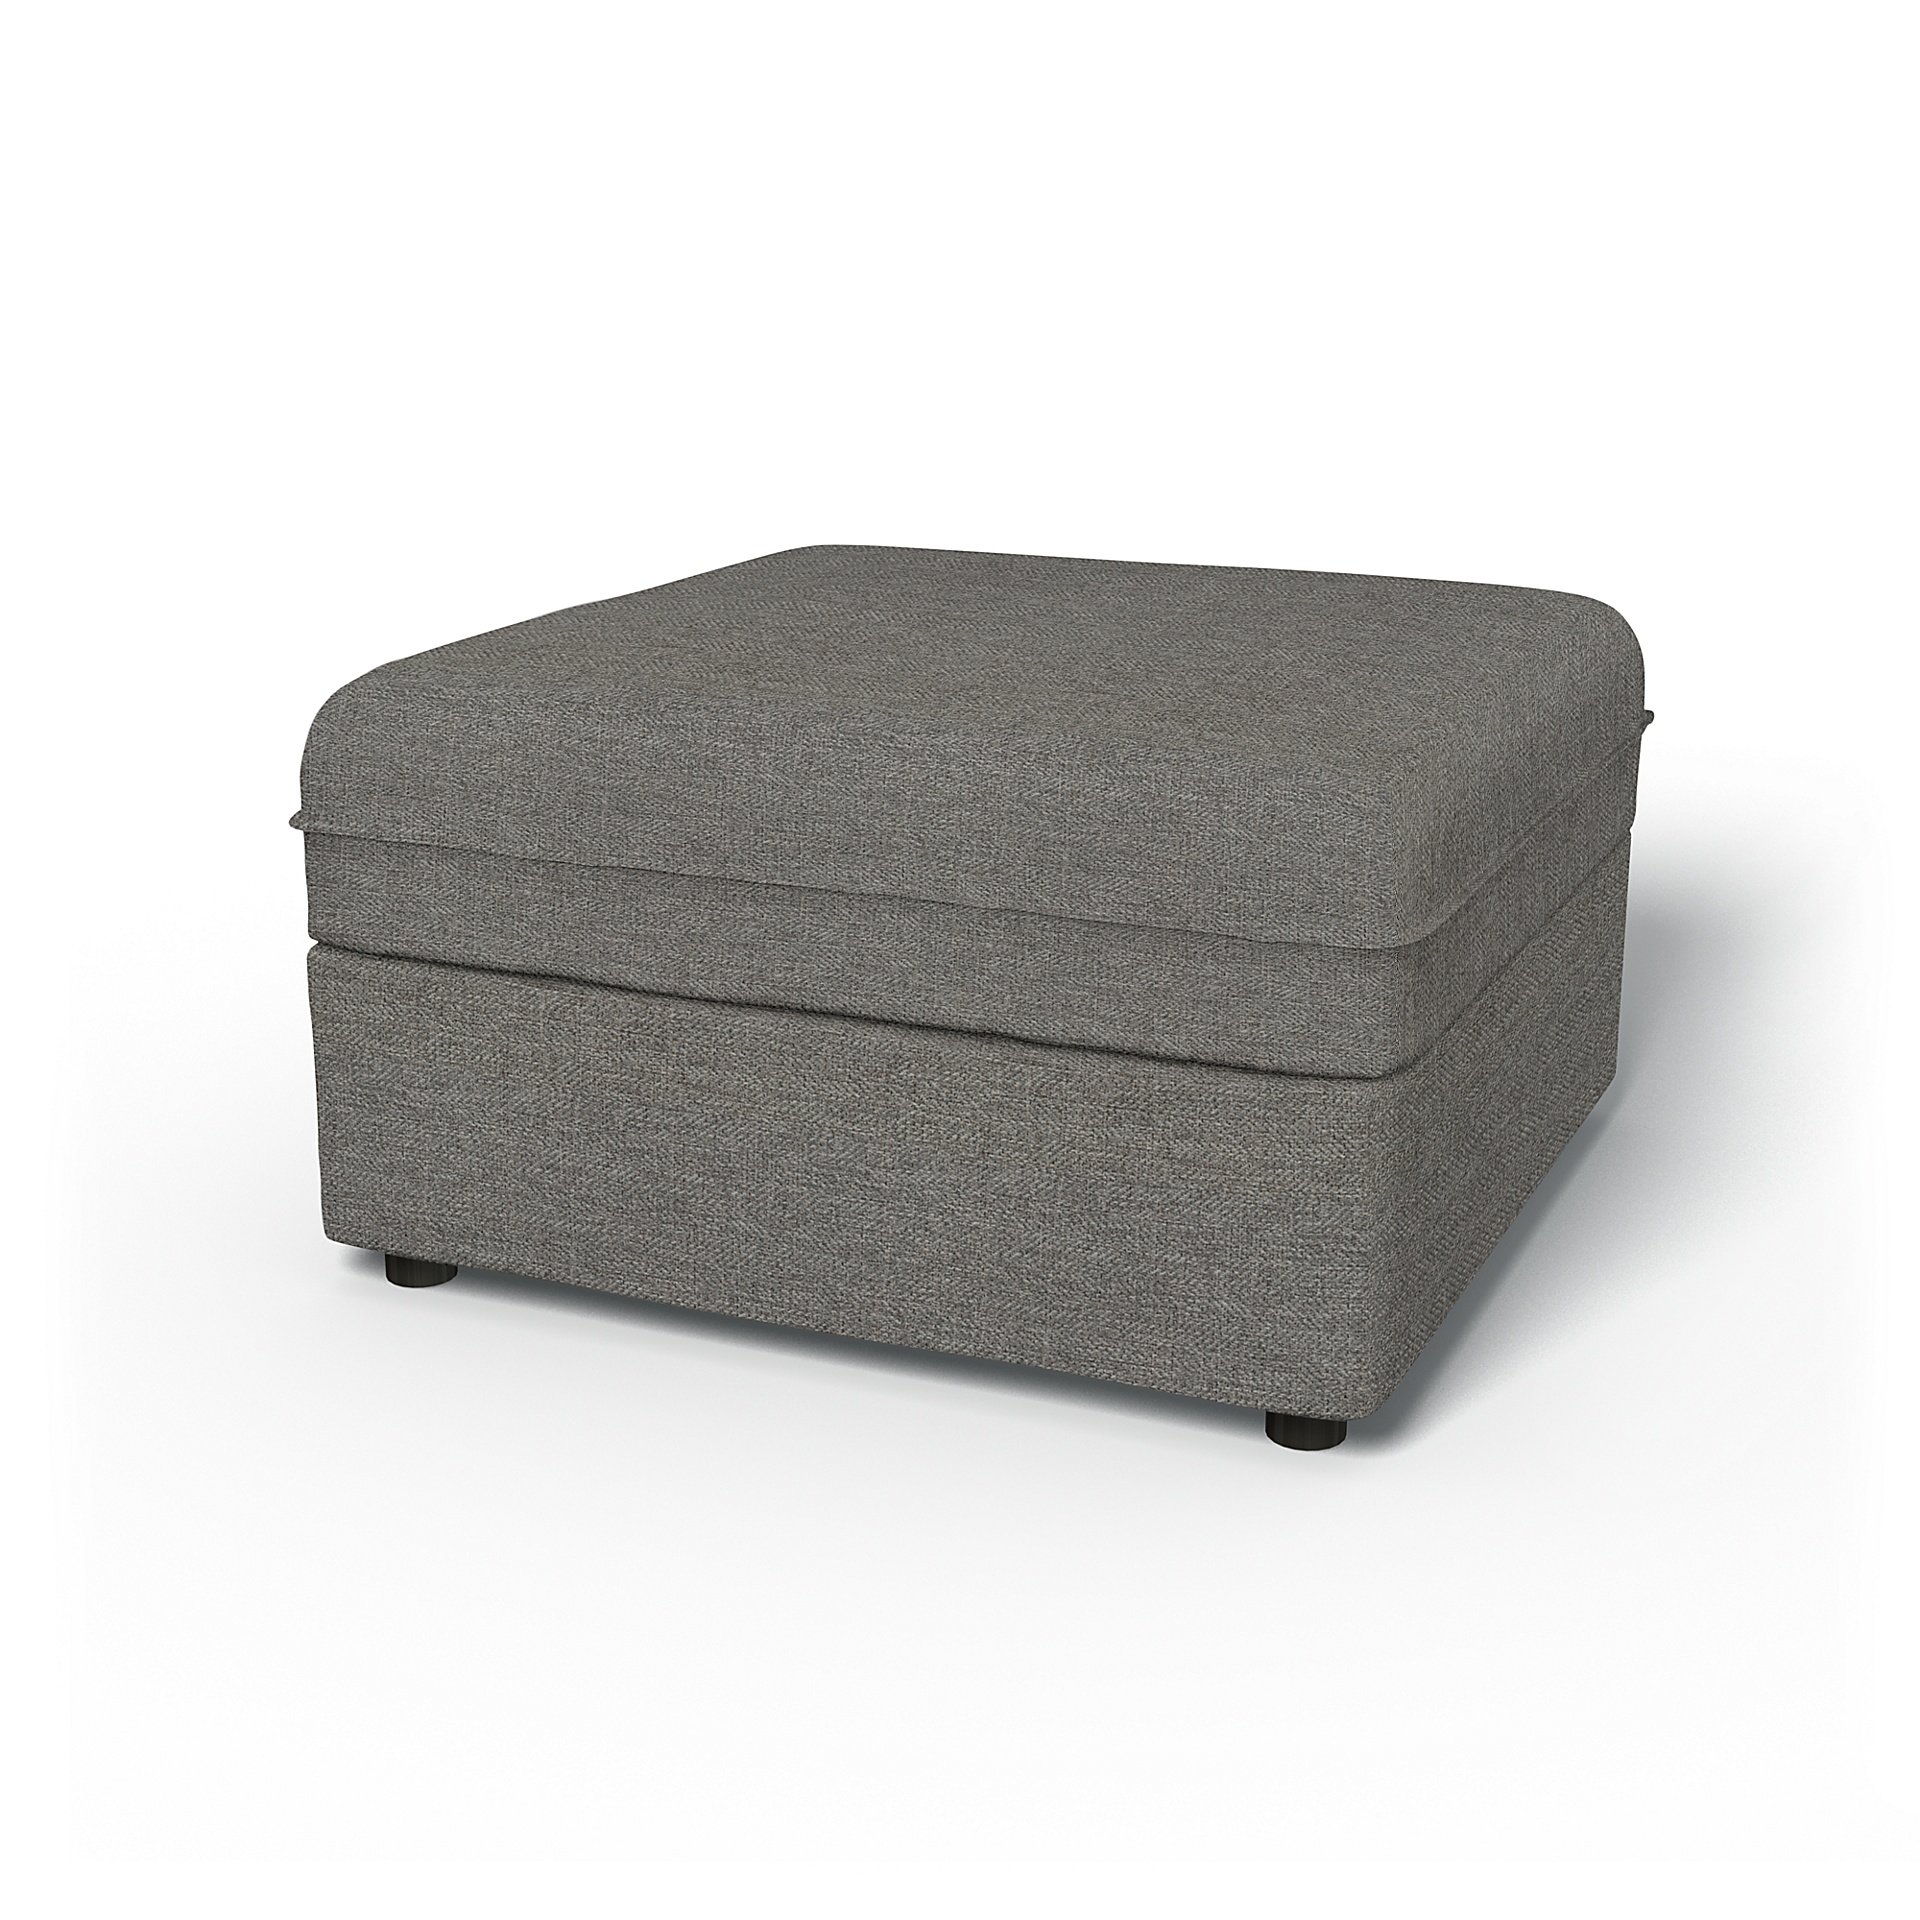 IKEA - Vallentuna Seat Module with Storage Cover 80x80cm 32x32in, Taupe, Boucle & Texture - Bemz